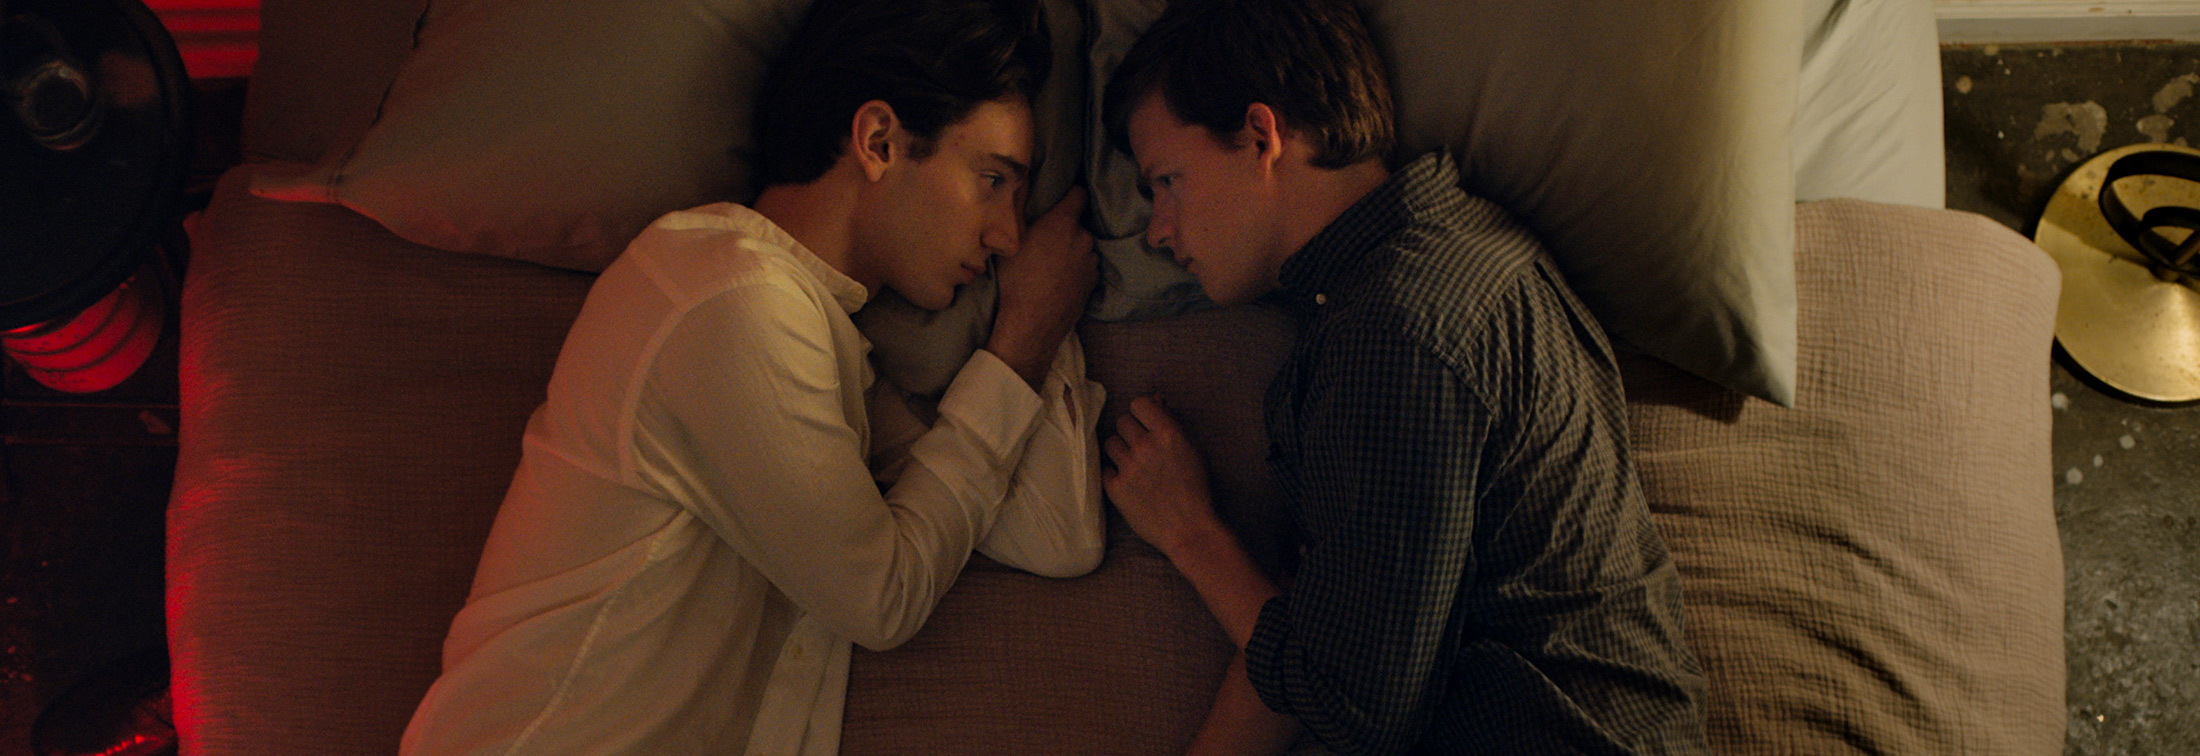 Boy Erased - All the best intentions, but never quite reaches them